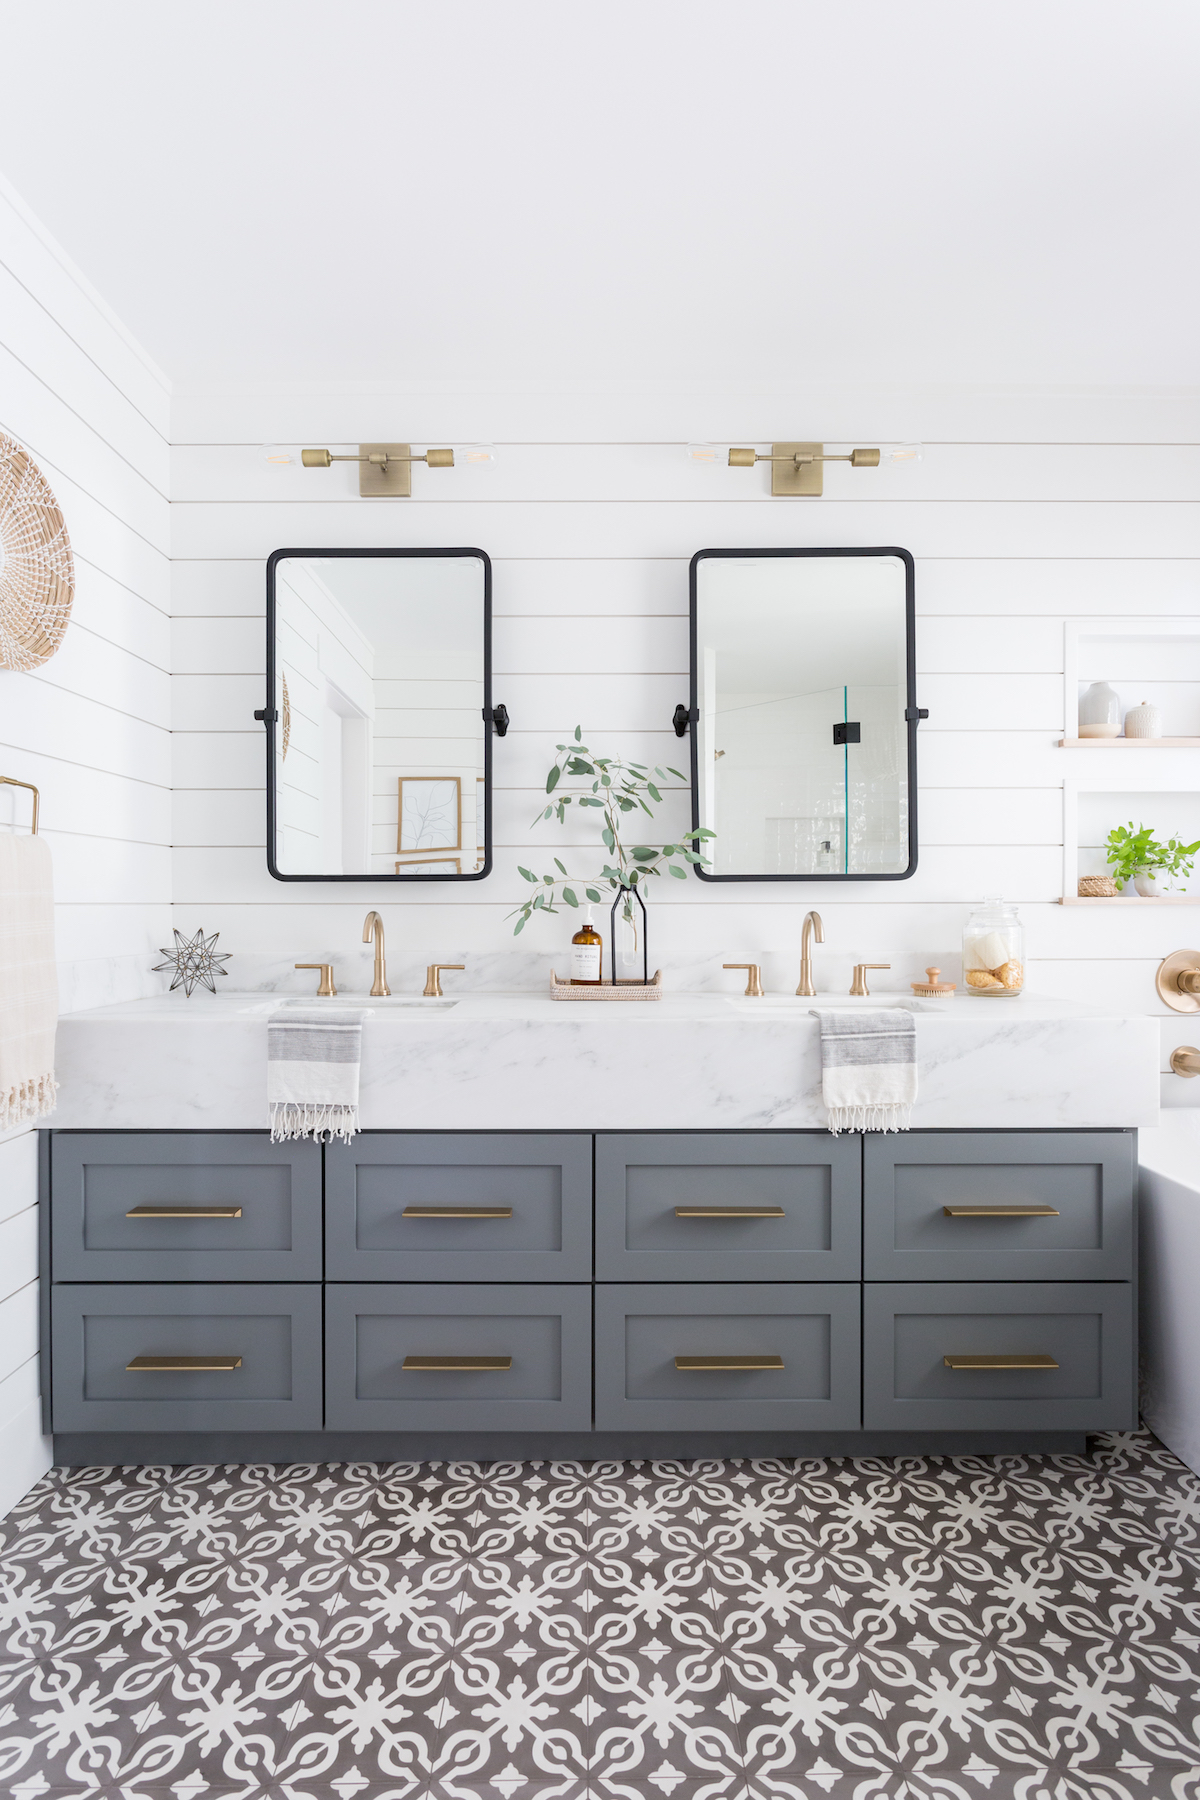 Light & Airy Bathroom with Shiplap, Patterned Tile & Mixed Metals - HAVEN